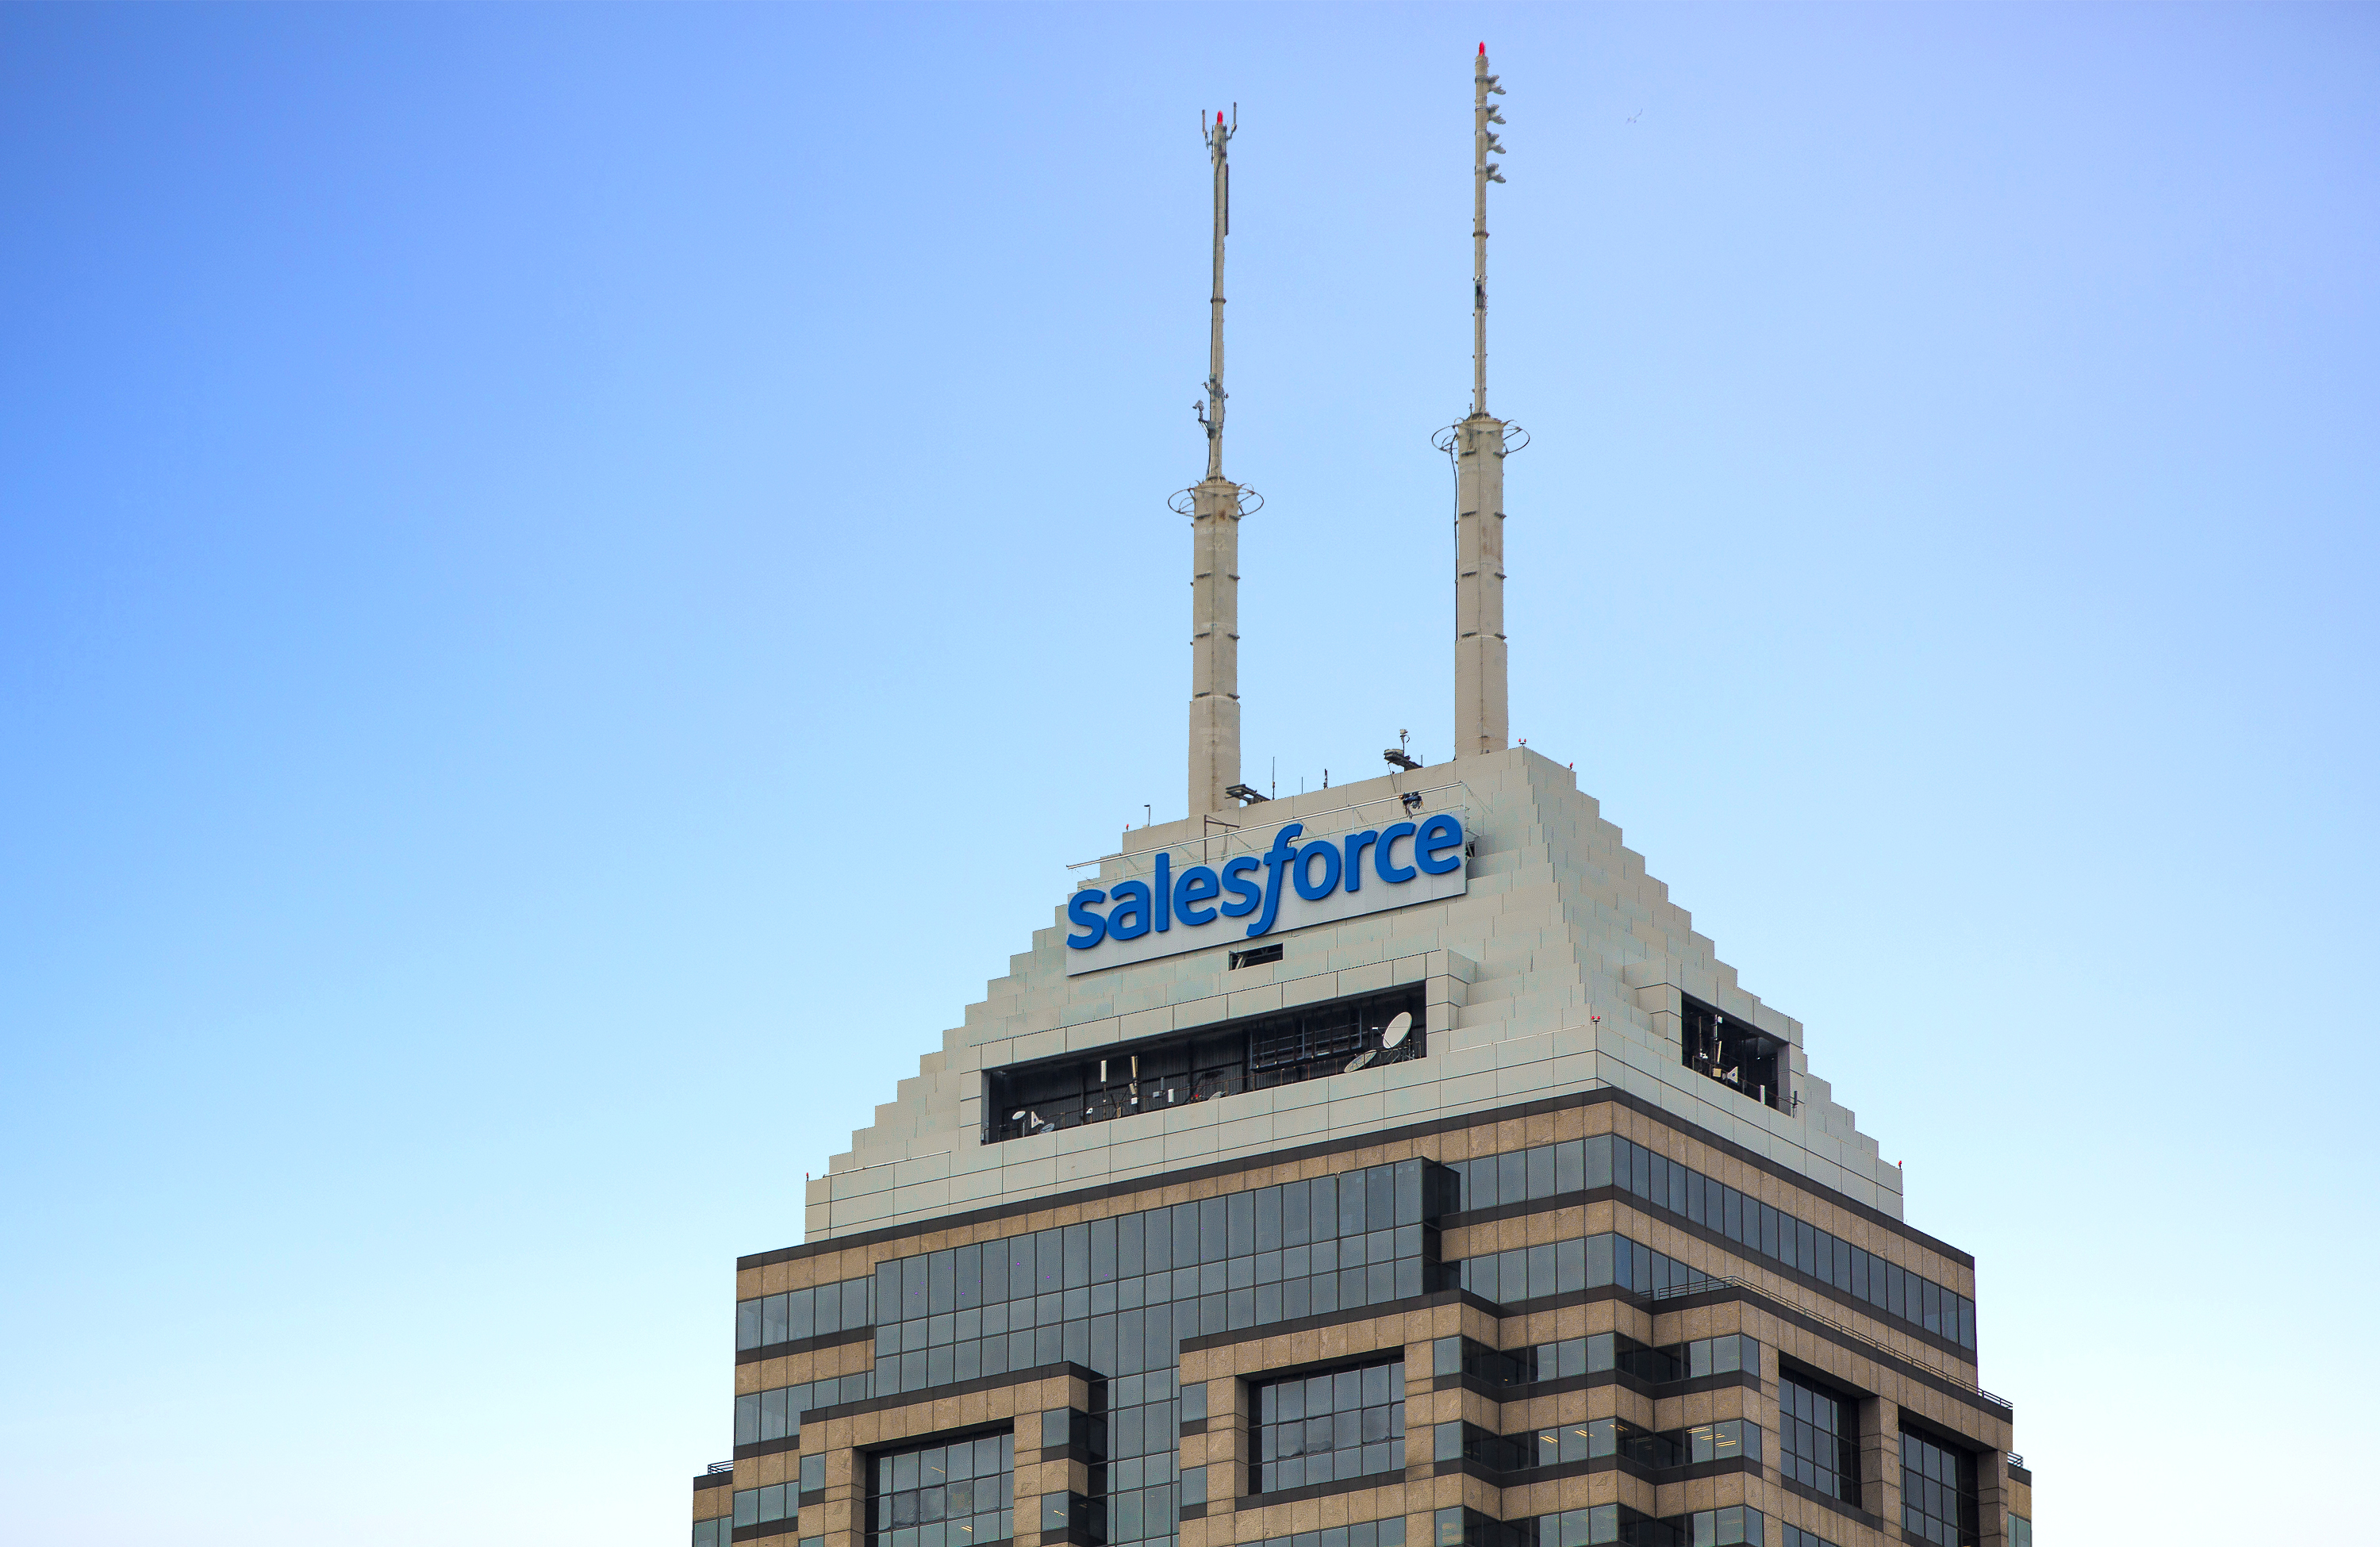 Introducing Salesforce Tower Indianapolis, Indiana’s Tallest Tower!